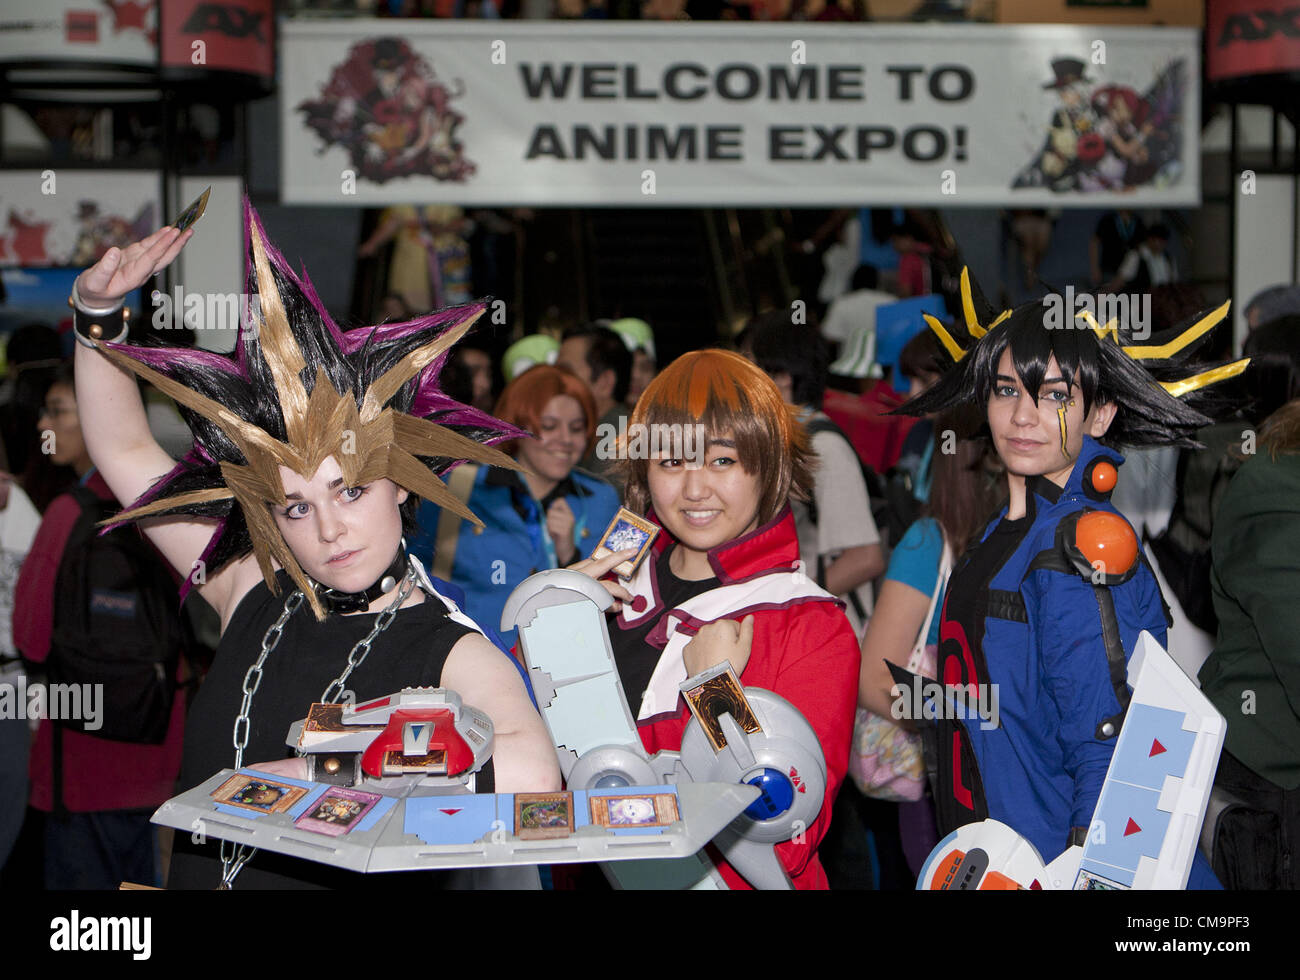 Los Angeles, California, UNITED STATES - About 130,000 anime aficionados  attend the Anime Expo 2012 at the Convention Center in Los Angeles  California on Friday, June 29, 2012 in Los Angeles, California.